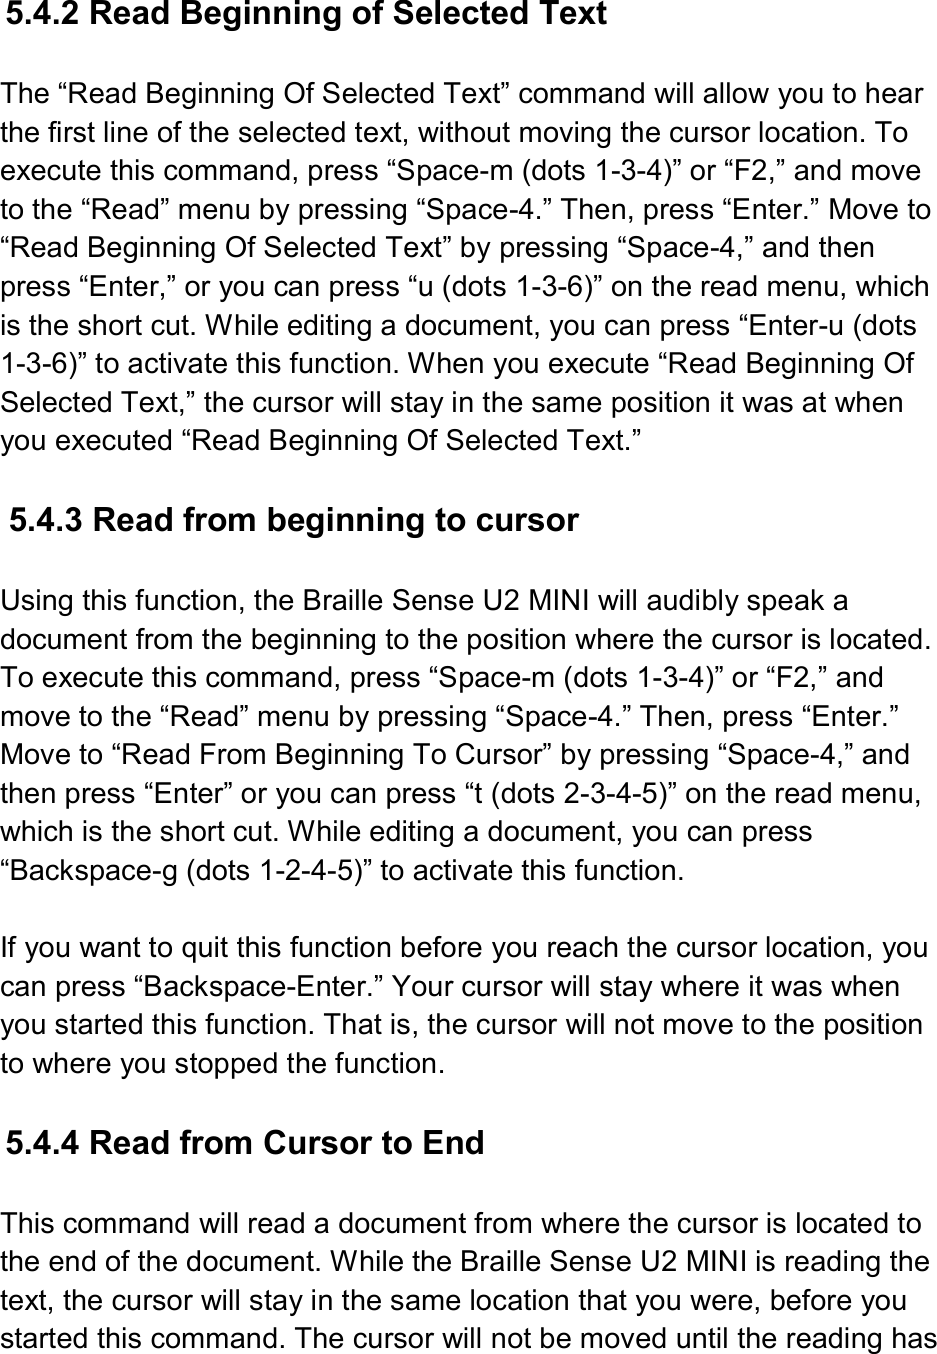   5.4.2 Read Beginning of Selected Text  The “Read Beginning Of Selected Text” command will allow you to hear the first line of the selected text, without moving the cursor location. To execute this command, press “Space-m (dots 1-3-4)” or “F2,” and move to the “Read” menu by pressing “Space-4.” Then, press “Enter.” Move to “Read Beginning Of Selected Text” by pressing “Space-4,” and then press “Enter,” or you can press “u (dots 1-3-6)” on the read menu, which is the short cut. While editing a document, you can press “Enter-u (dots 1-3-6)” to activate this function. When you execute “Read Beginning Of Selected Text,” the cursor will stay in the same position it was at when you executed “Read Beginning Of Selected Text.”  5.4.3 Read from beginning to cursor  Using this function, the Braille Sense U2 MINI will audibly speak a document from the beginning to the position where the cursor is located. To execute this command, press “Space-m (dots 1-3-4)” or “F2,” and move to the “Read” menu by pressing “Space-4.” Then, press “Enter.” Move to “Read From Beginning To Cursor” by pressing “Space-4,” and then press “Enter” or you can press “t (dots 2-3-4-5)” on the read menu, which is the short cut. While editing a document, you can press “Backspace-g (dots 1-2-4-5)” to activate this function.  If you want to quit this function before you reach the cursor location, you can press “Backspace-Enter.” Your cursor will stay where it was when you started this function. That is, the cursor will not move to the position to where you stopped the function.  5.4.4 Read from Cursor to End  This command will read a document from where the cursor is located to the end of the document. While the Braille Sense U2 MINI is reading the text, the cursor will stay in the same location that you were, before you started this command. The cursor will not be moved until the reading has 